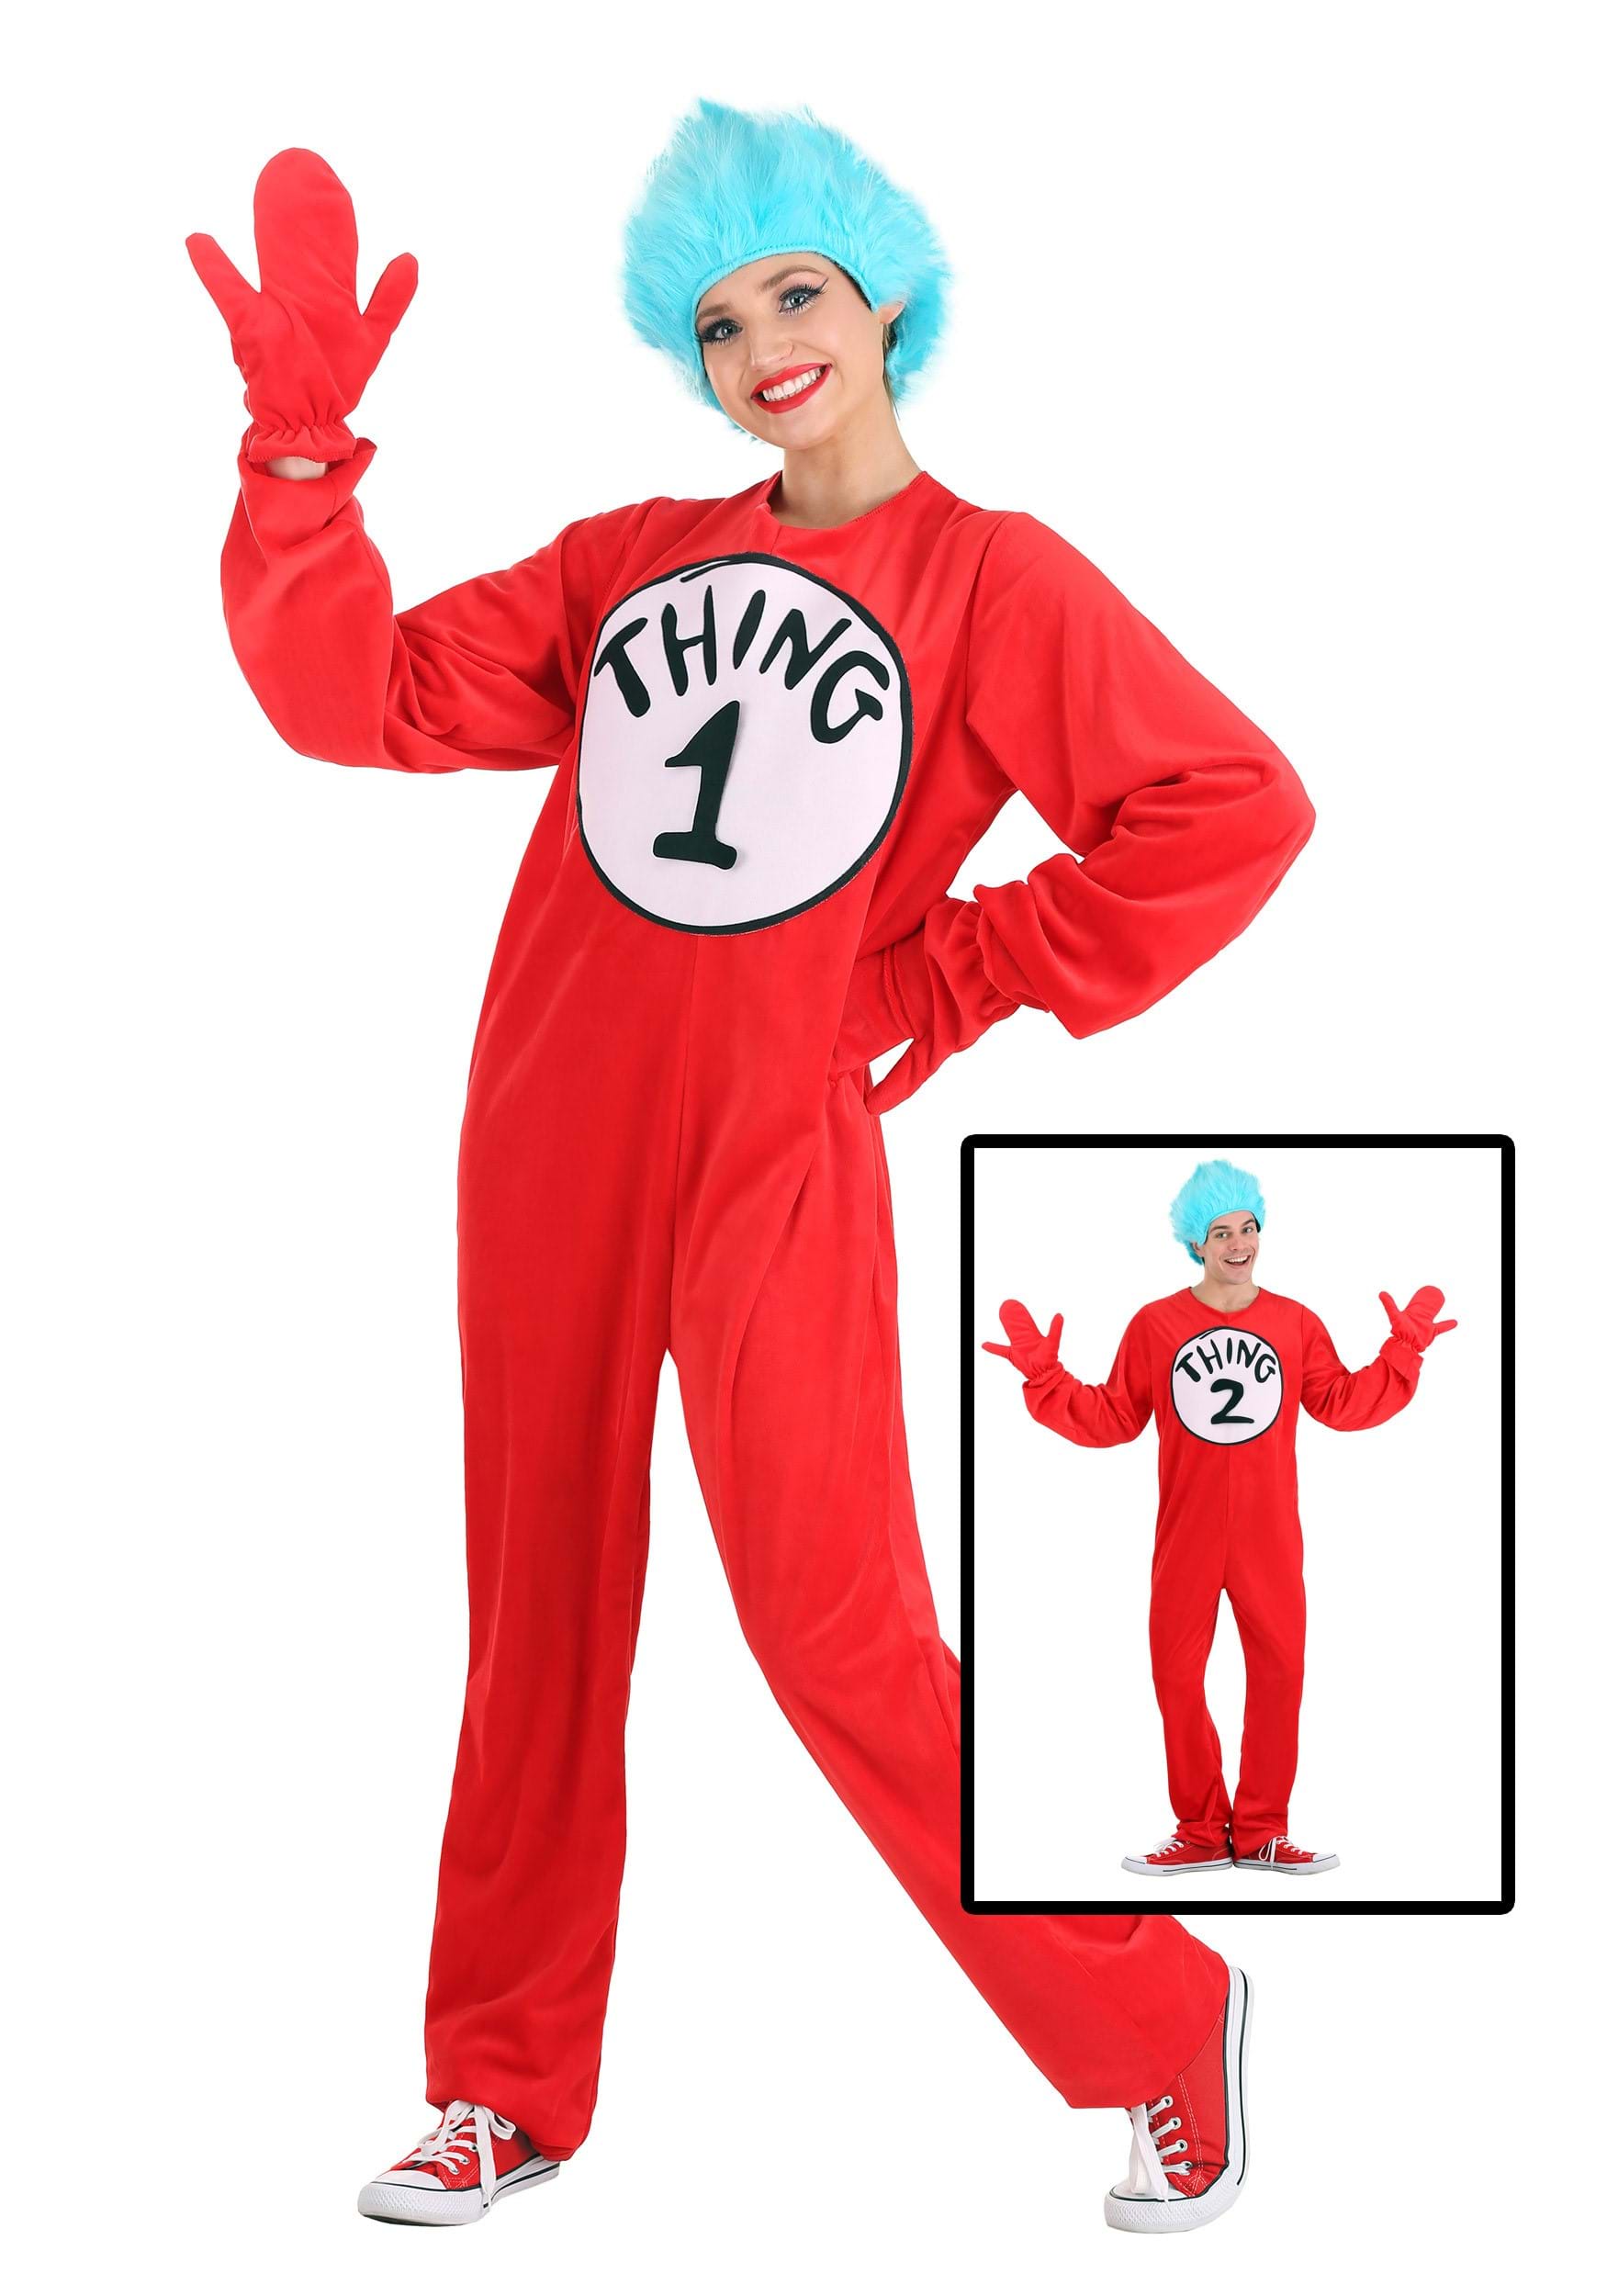 Photos - Fancy Dress A&D FUN Costumes Thing 1 and Thing 2 Costume for Adults Red/Blue/White 